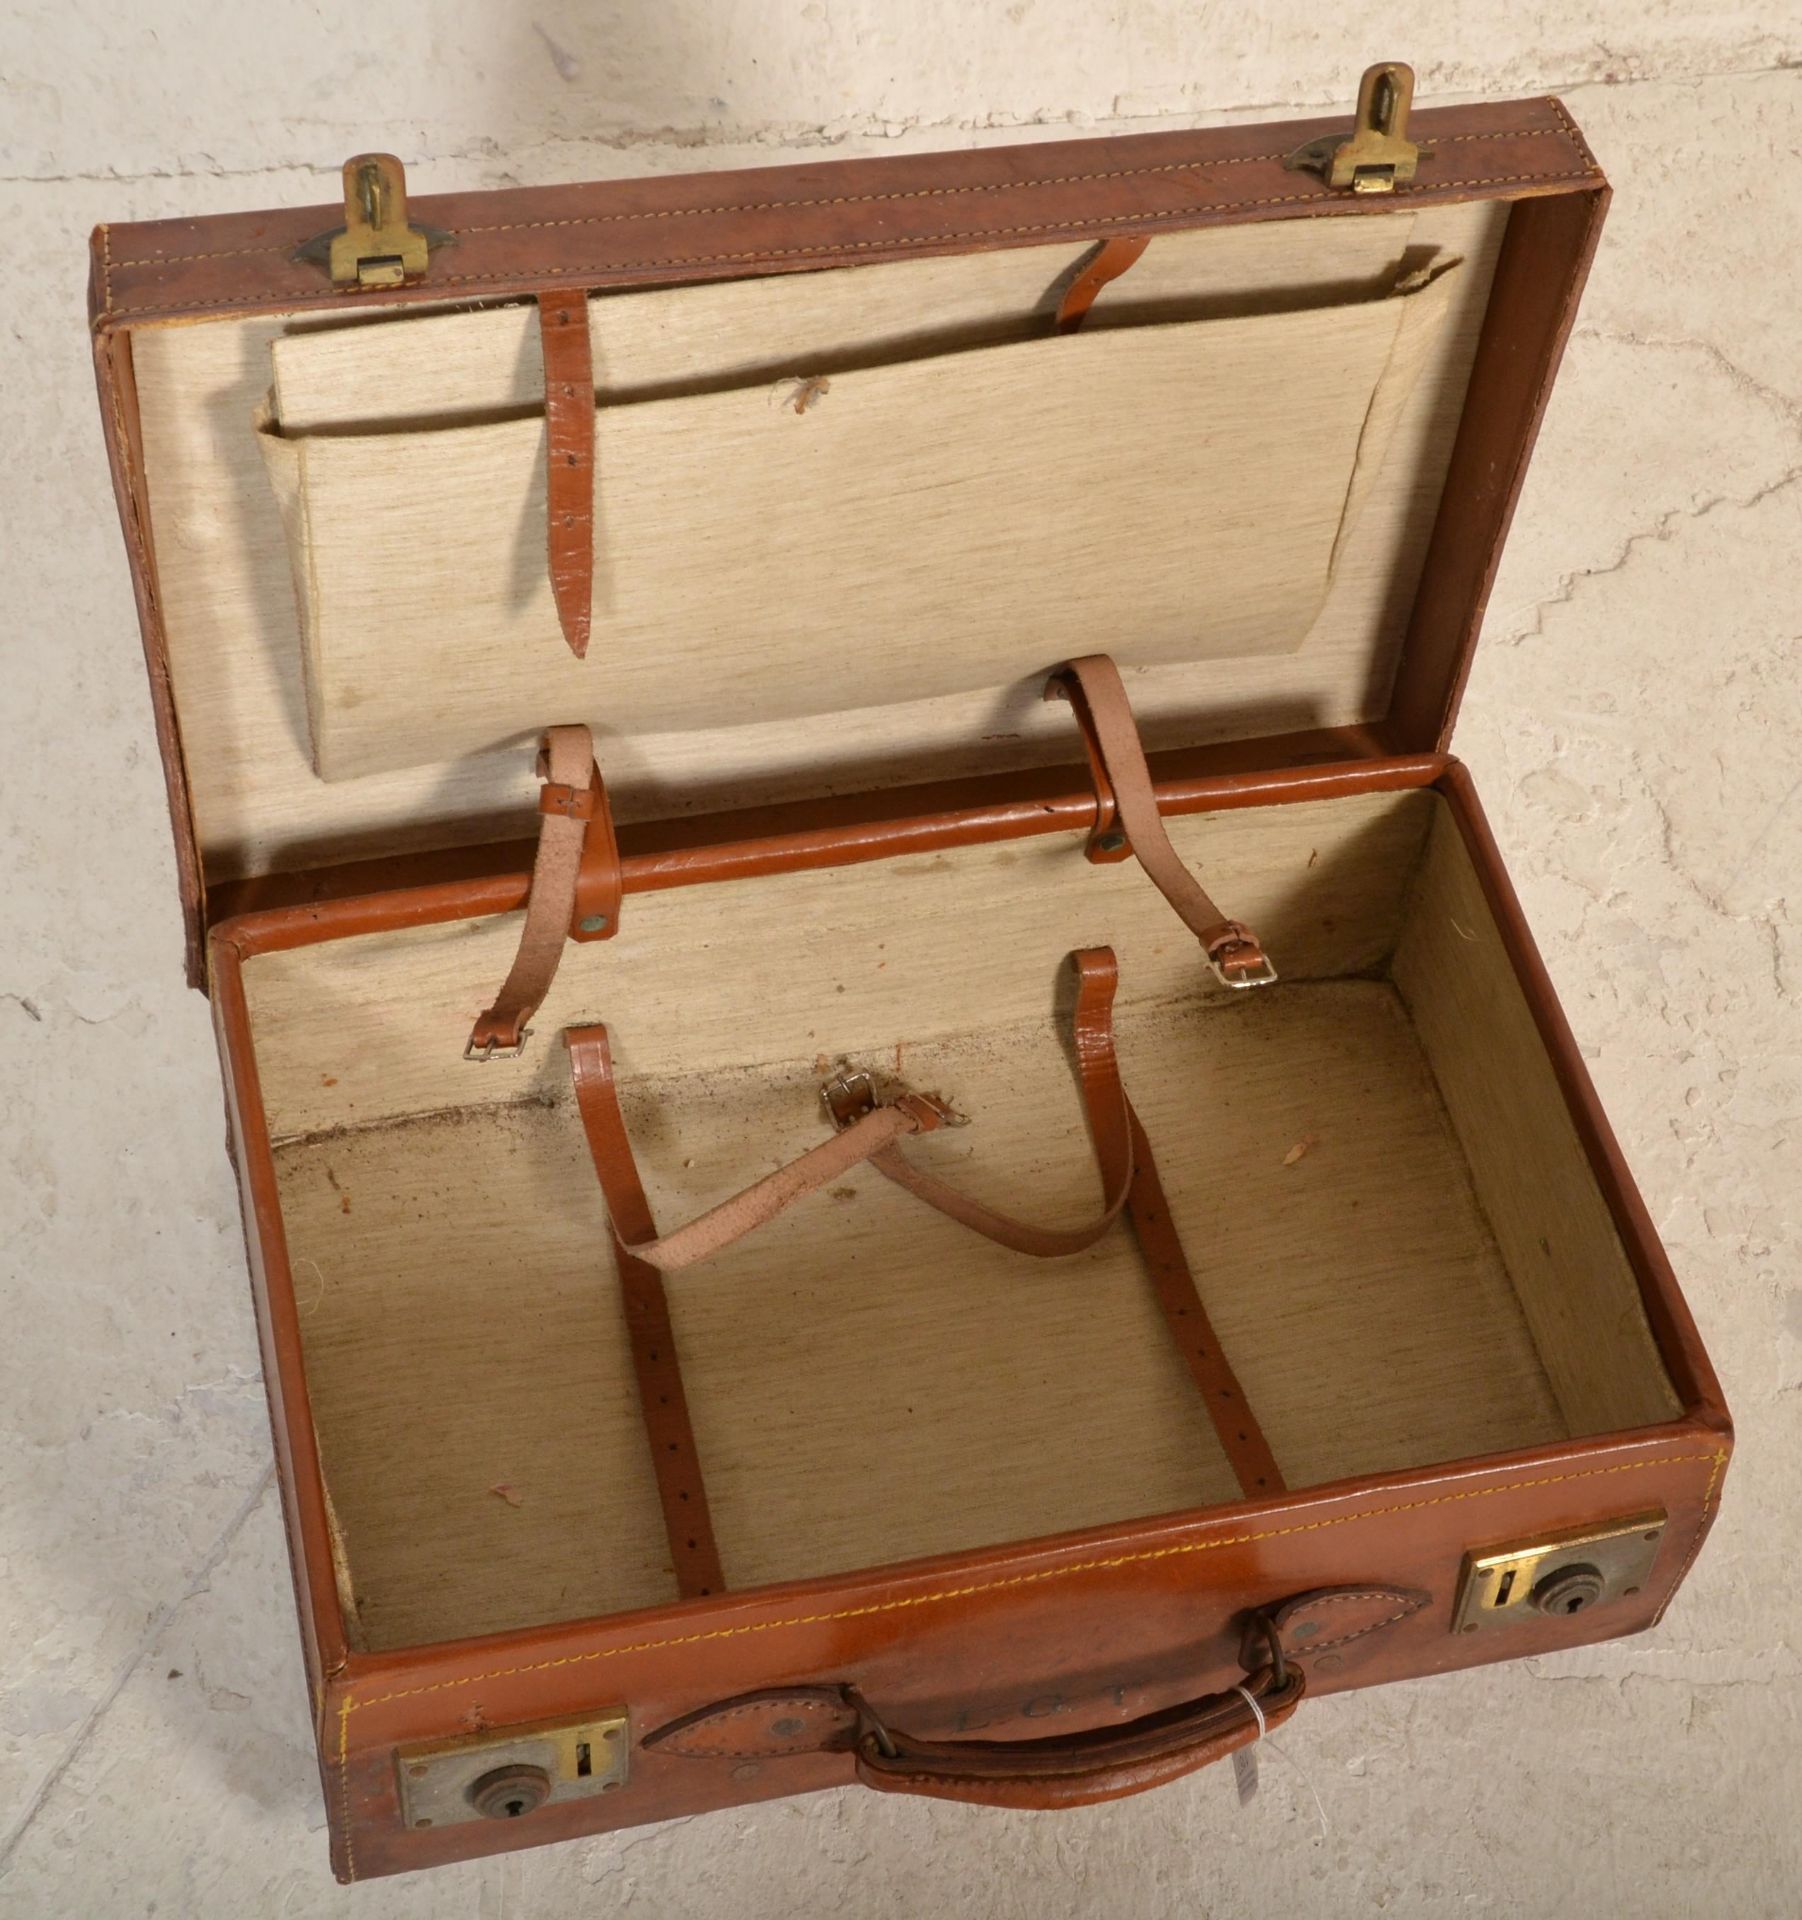 A good quality early 20th century leather suitcase with clasp locks and leather handles, remains - Image 4 of 4